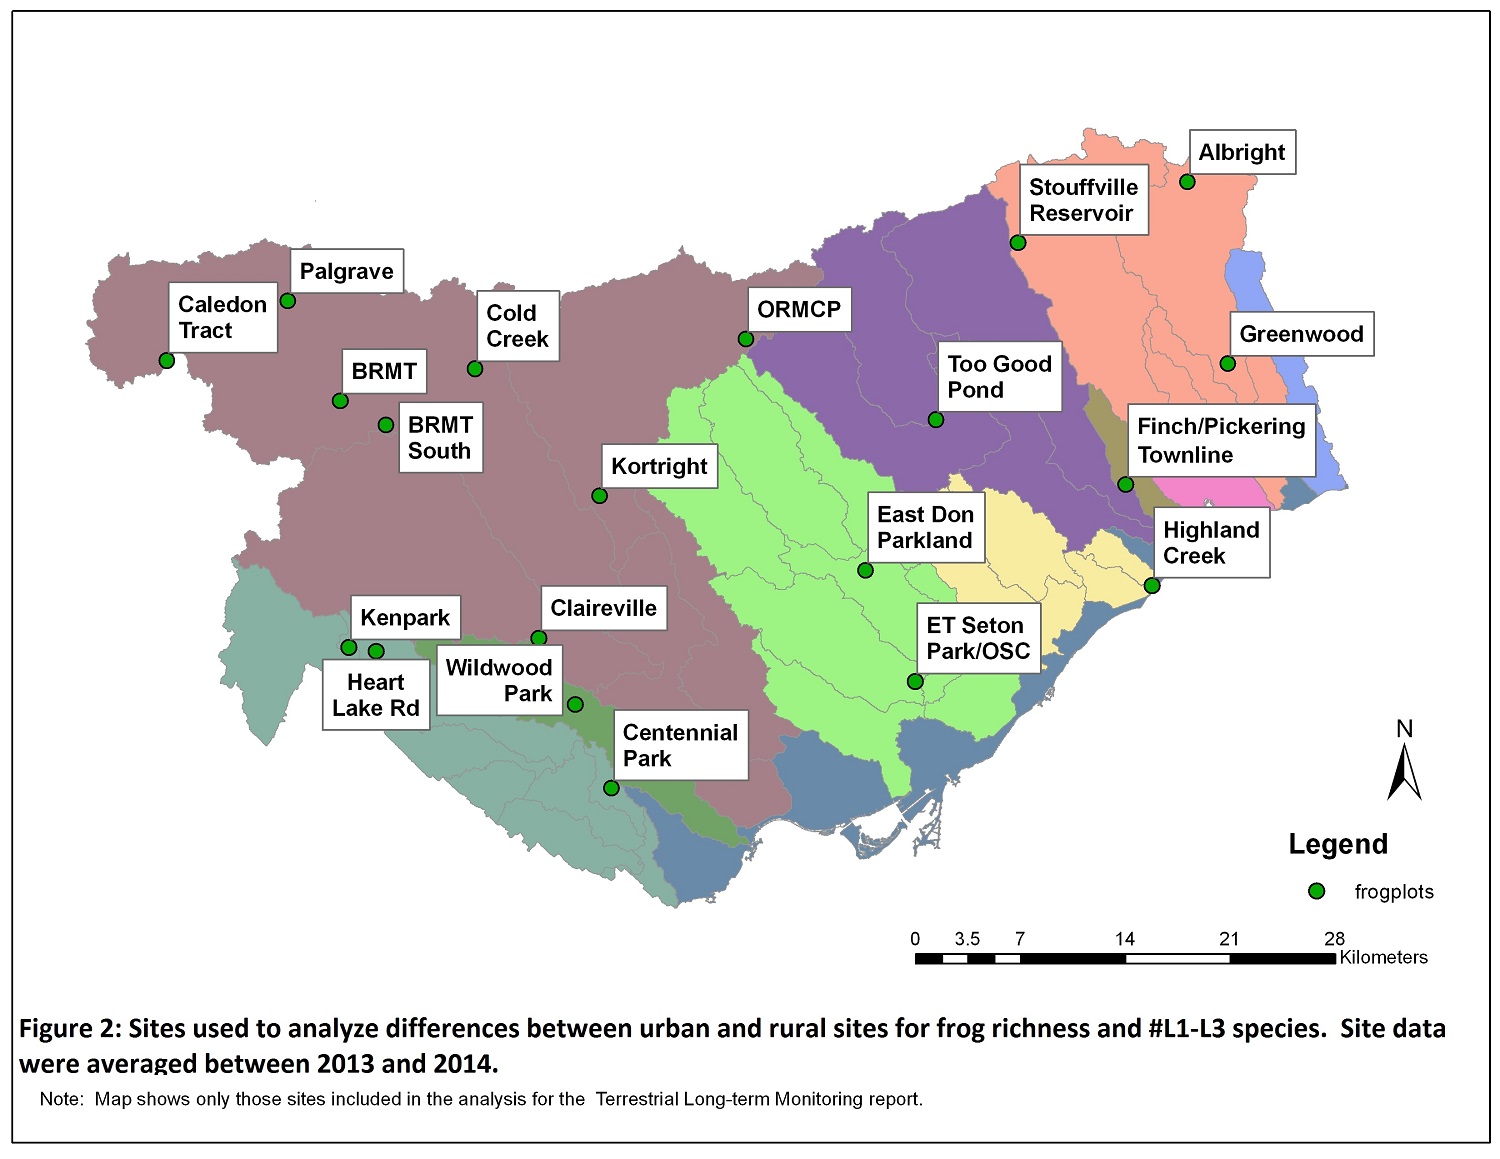 map showing sites used to analyze difference between urban and rural sites for frog richness